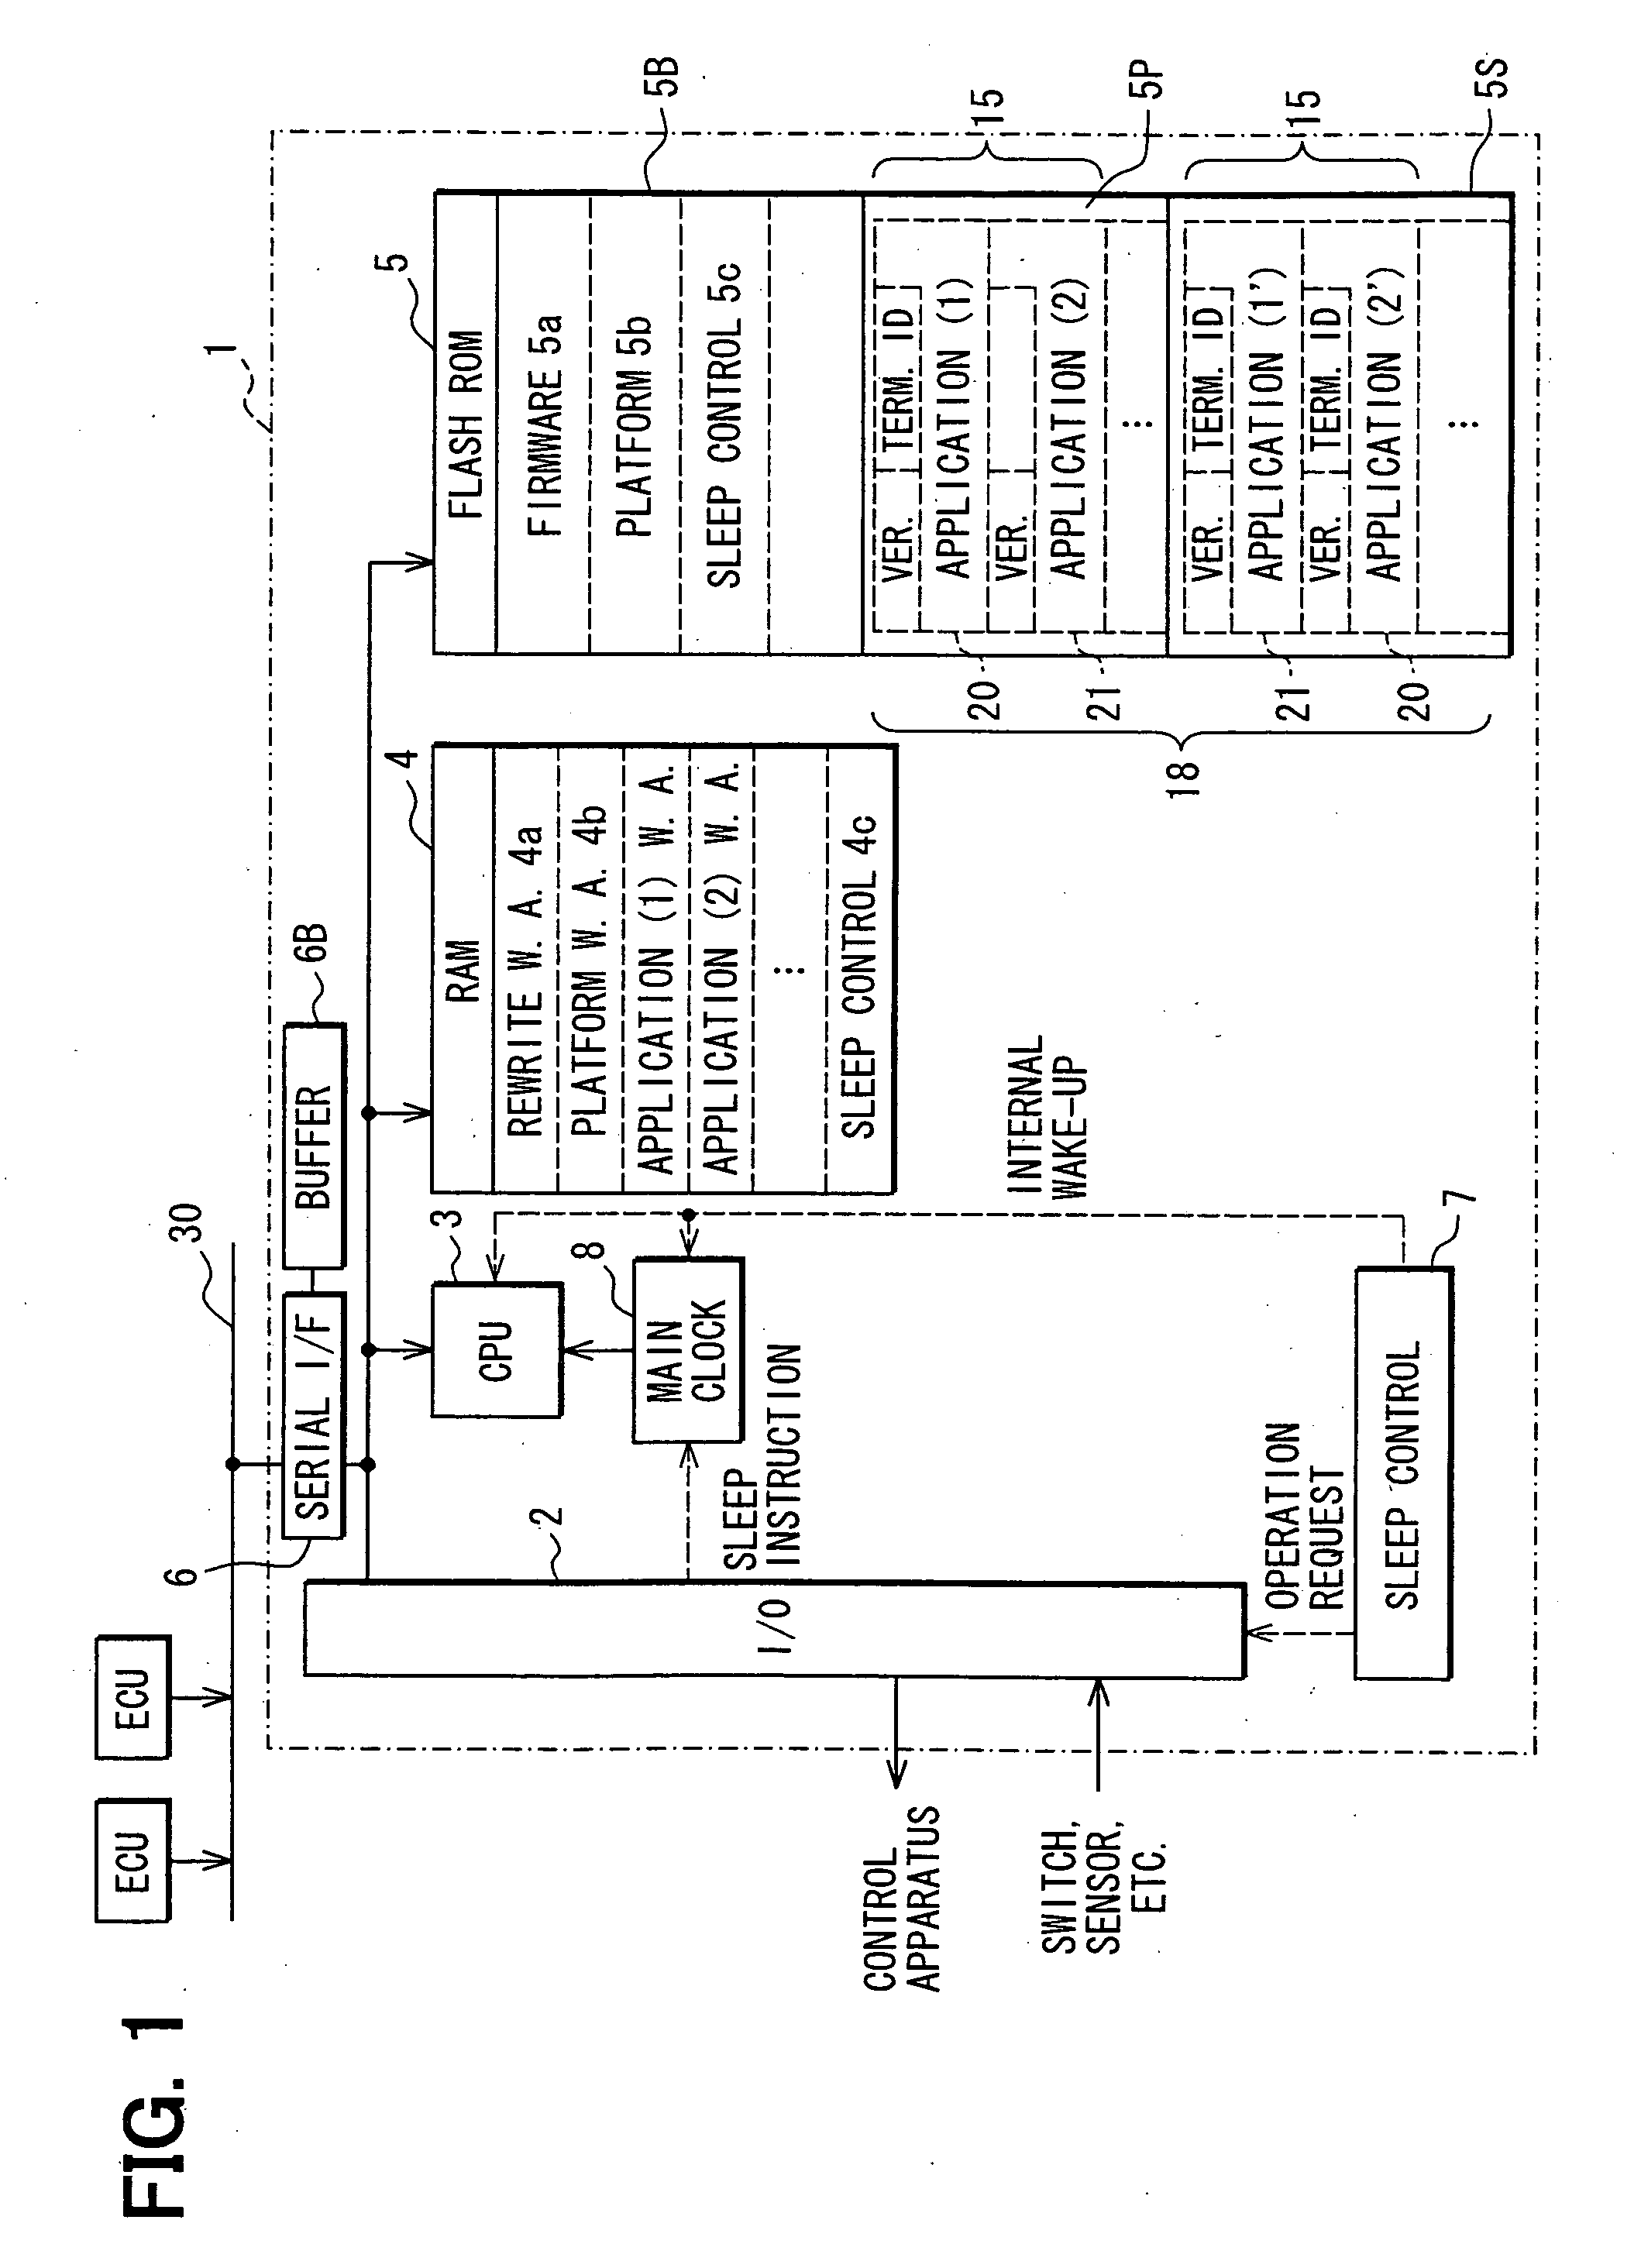 Electronic control system for automobile